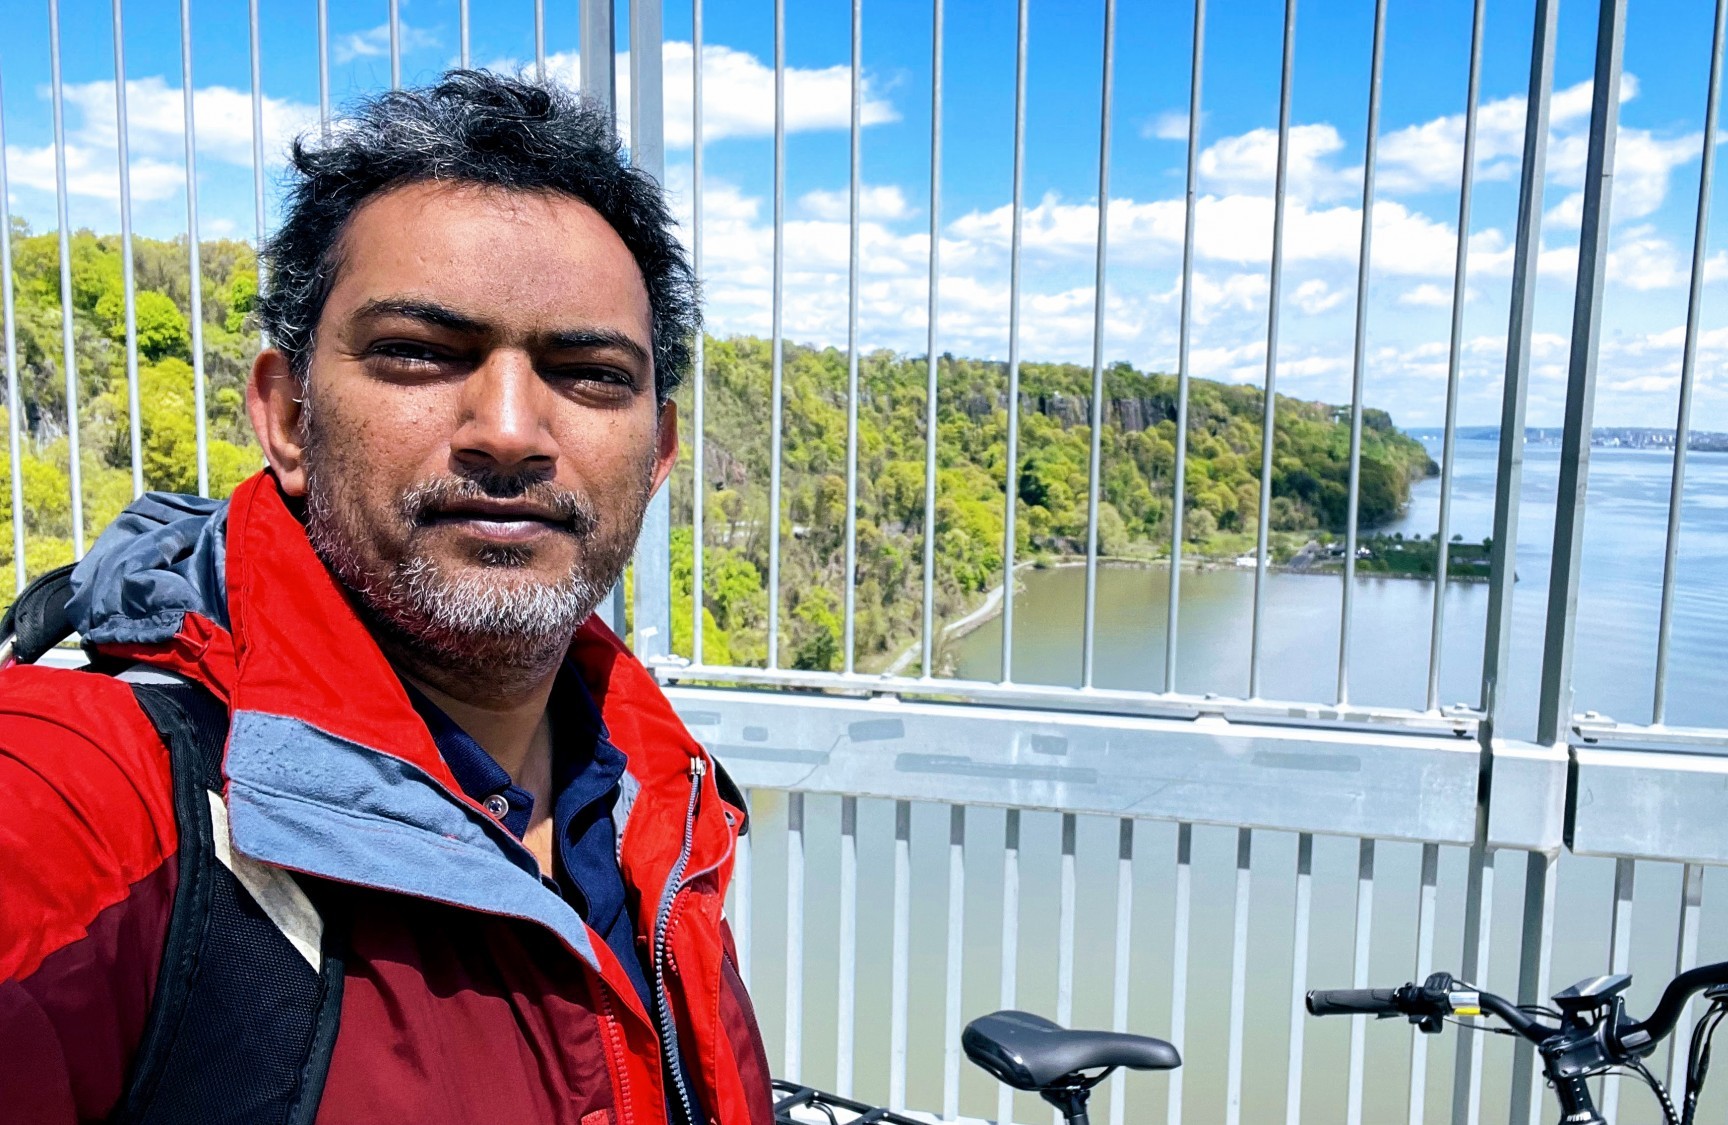 Raju Tomer (Associate Professor, Department of Biological Sciences) 
commutes by e-bike to Morningside campus from Closter, New Jersey.
